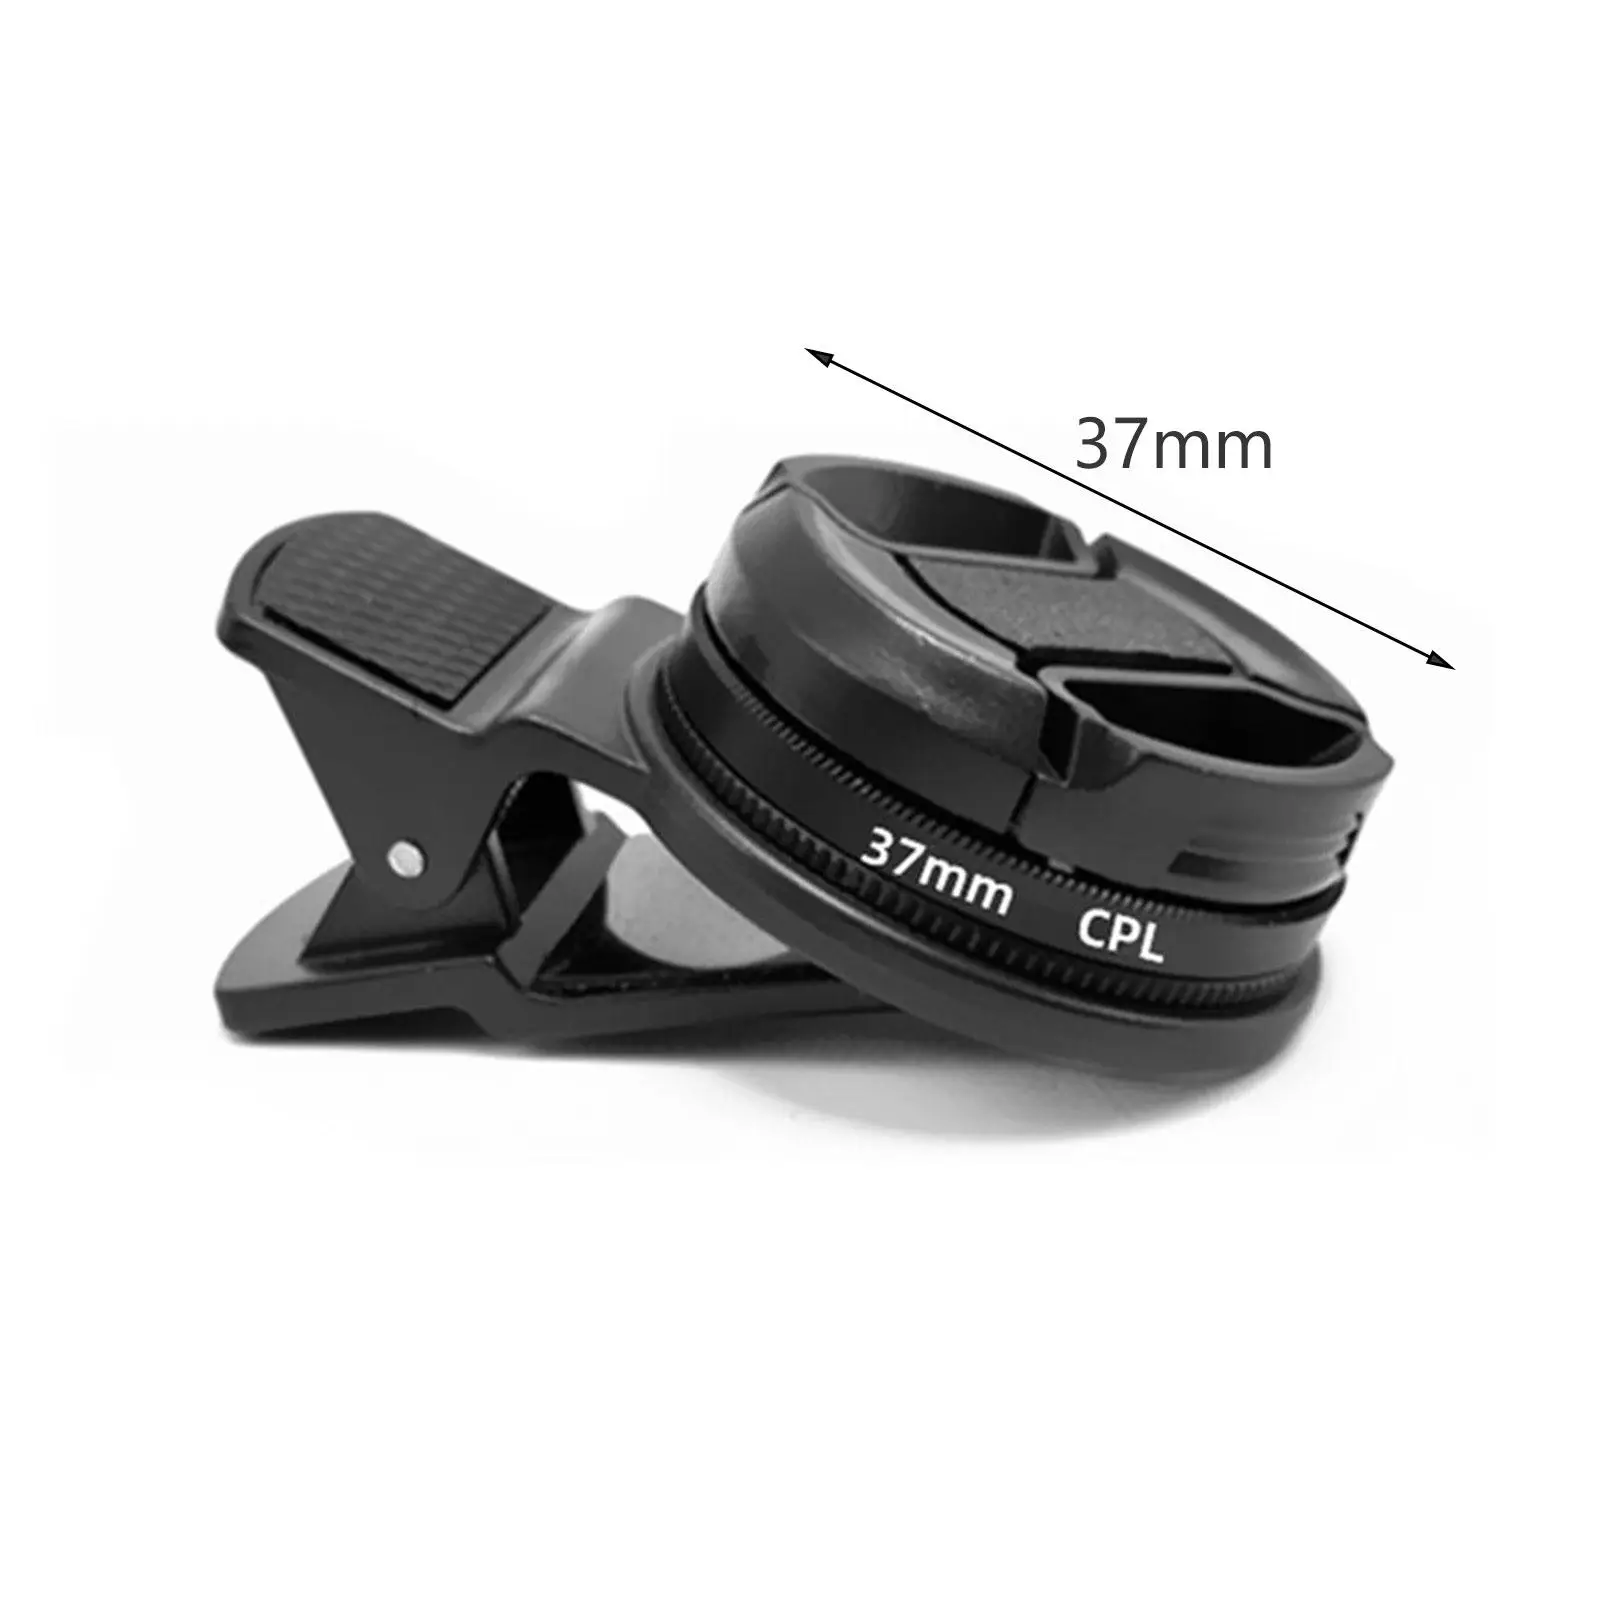 37mm CPL Phone Camera Lens, CPL Polarizing Filter Lens Accessories, Universal Polarized Smartphones Camera Lens, with Bag